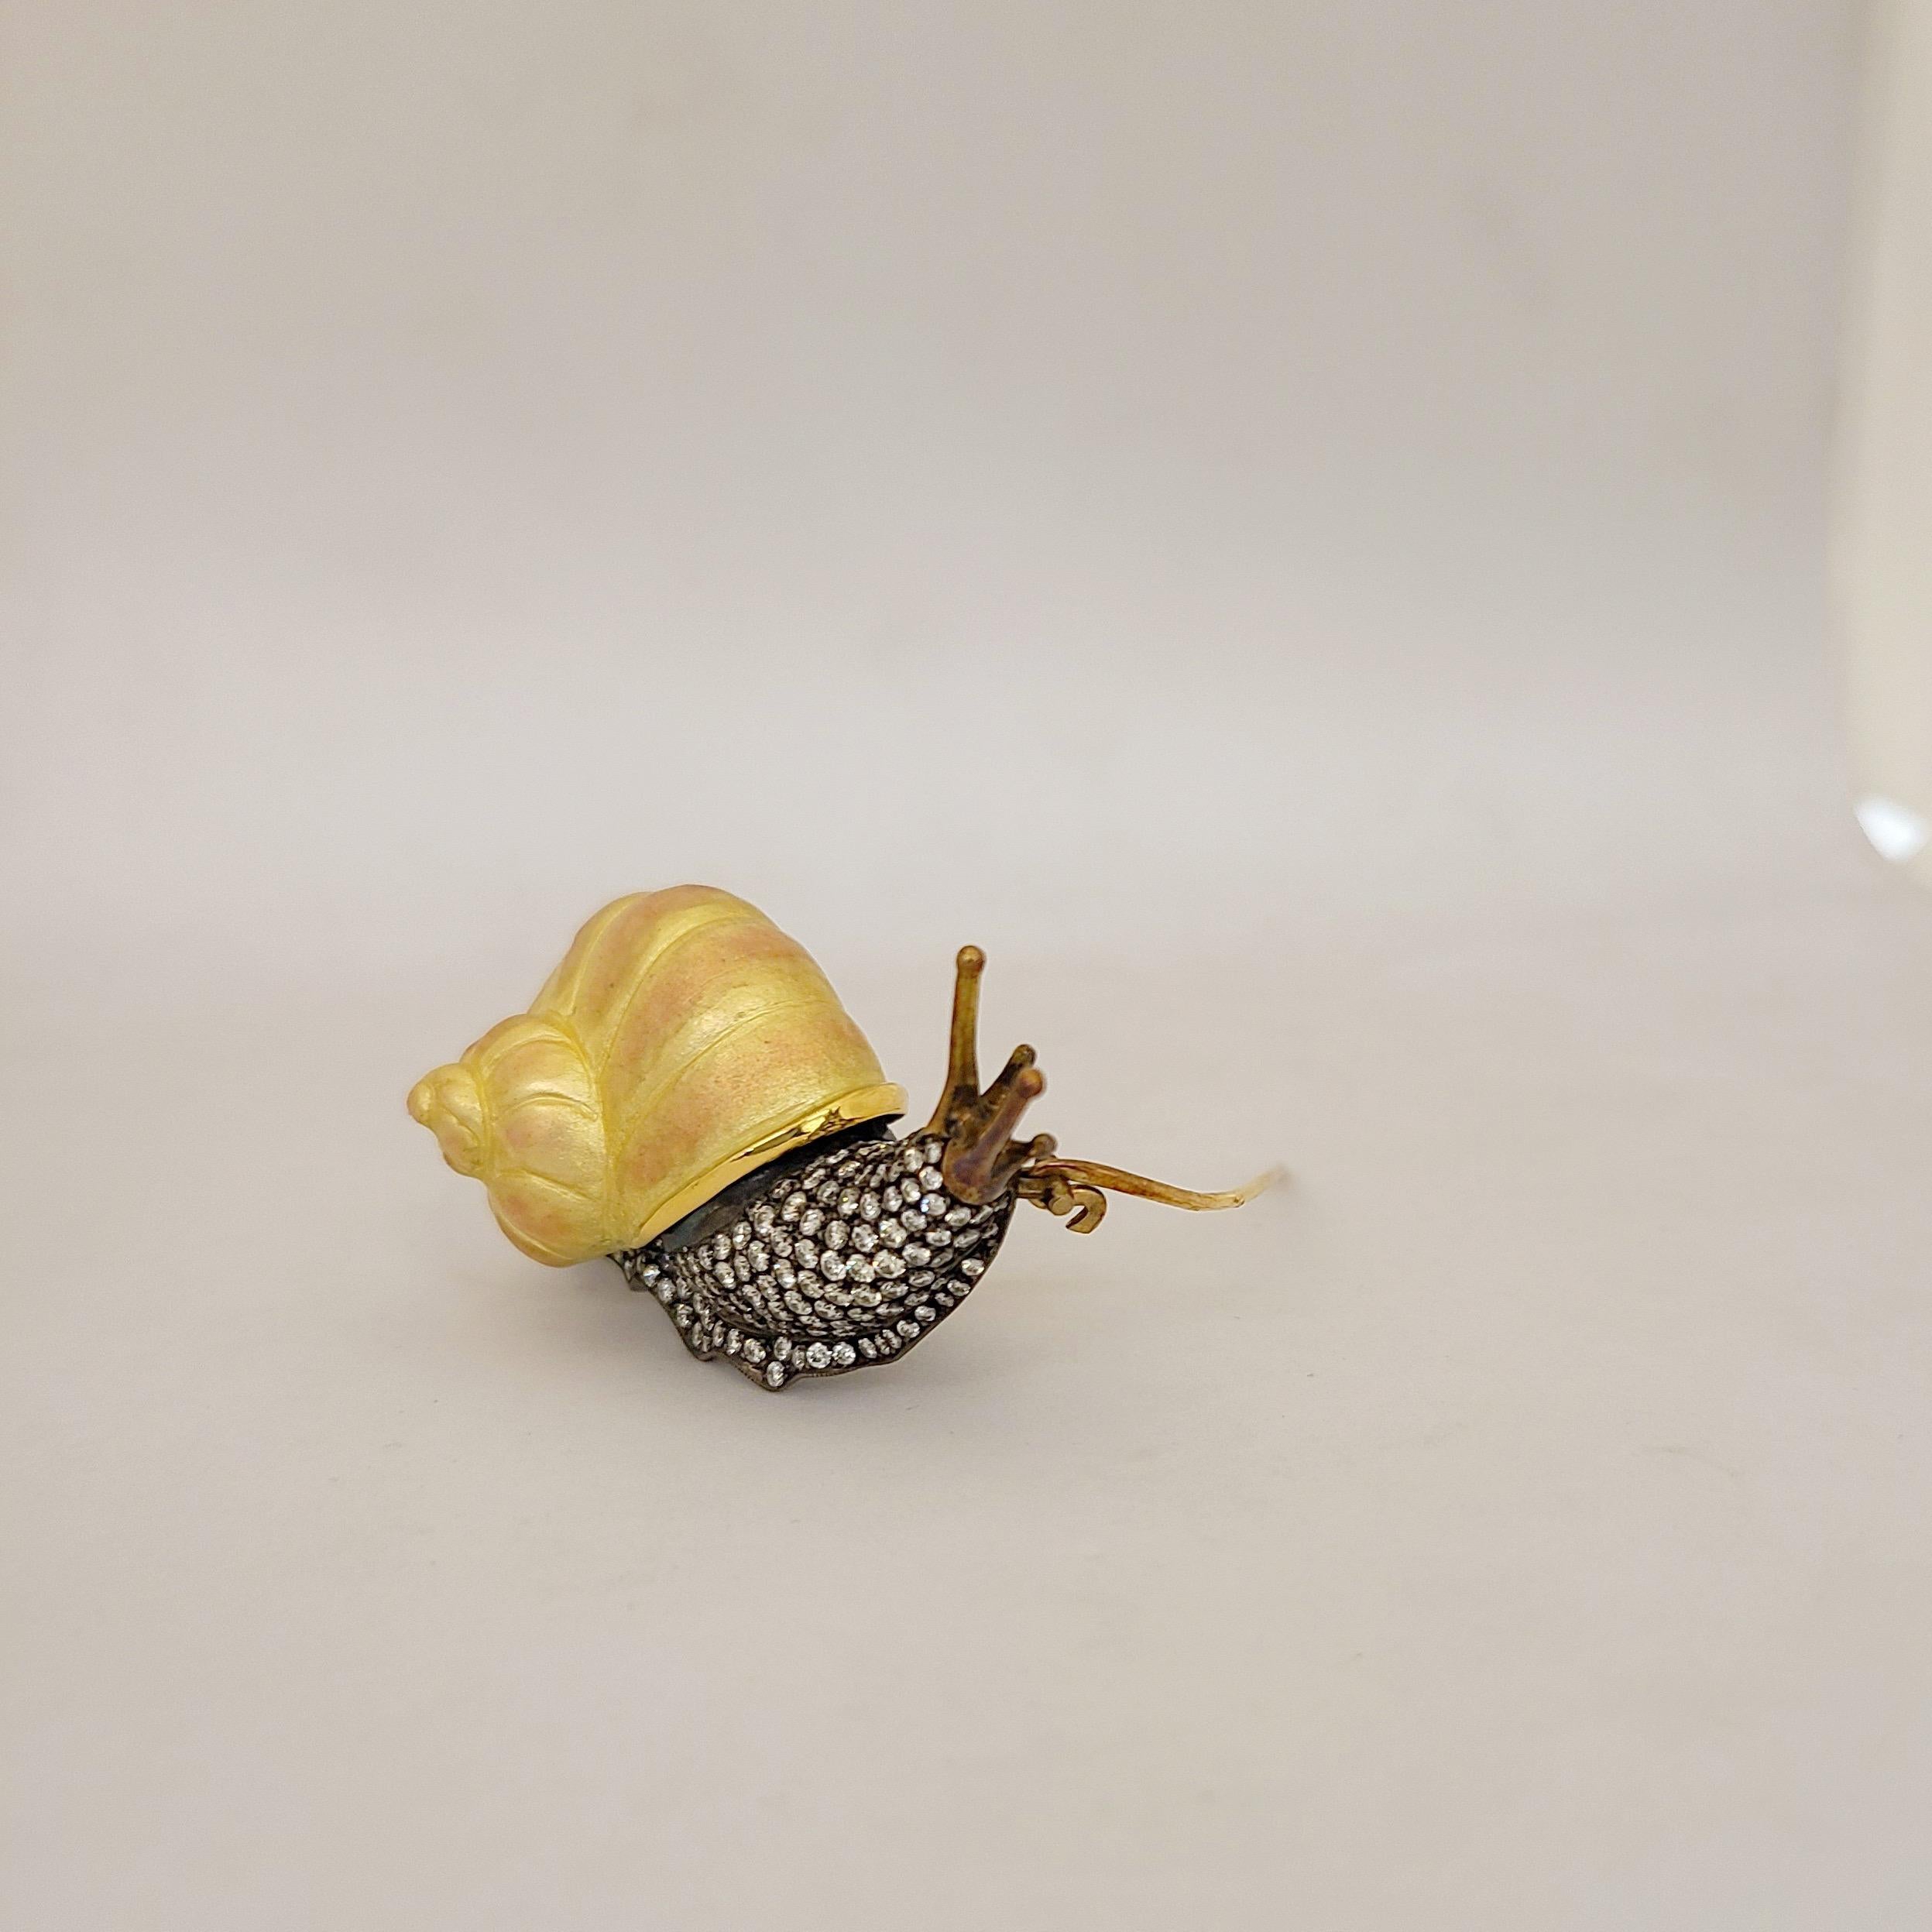 Known as a symbol of patience, this magnificent snail brooch has been crafted by Irlan of Turkey. They have combined 18 karat yellow gold, blackened gold and sterling silver in the design of this brooch .The snails body is set with round brilliant